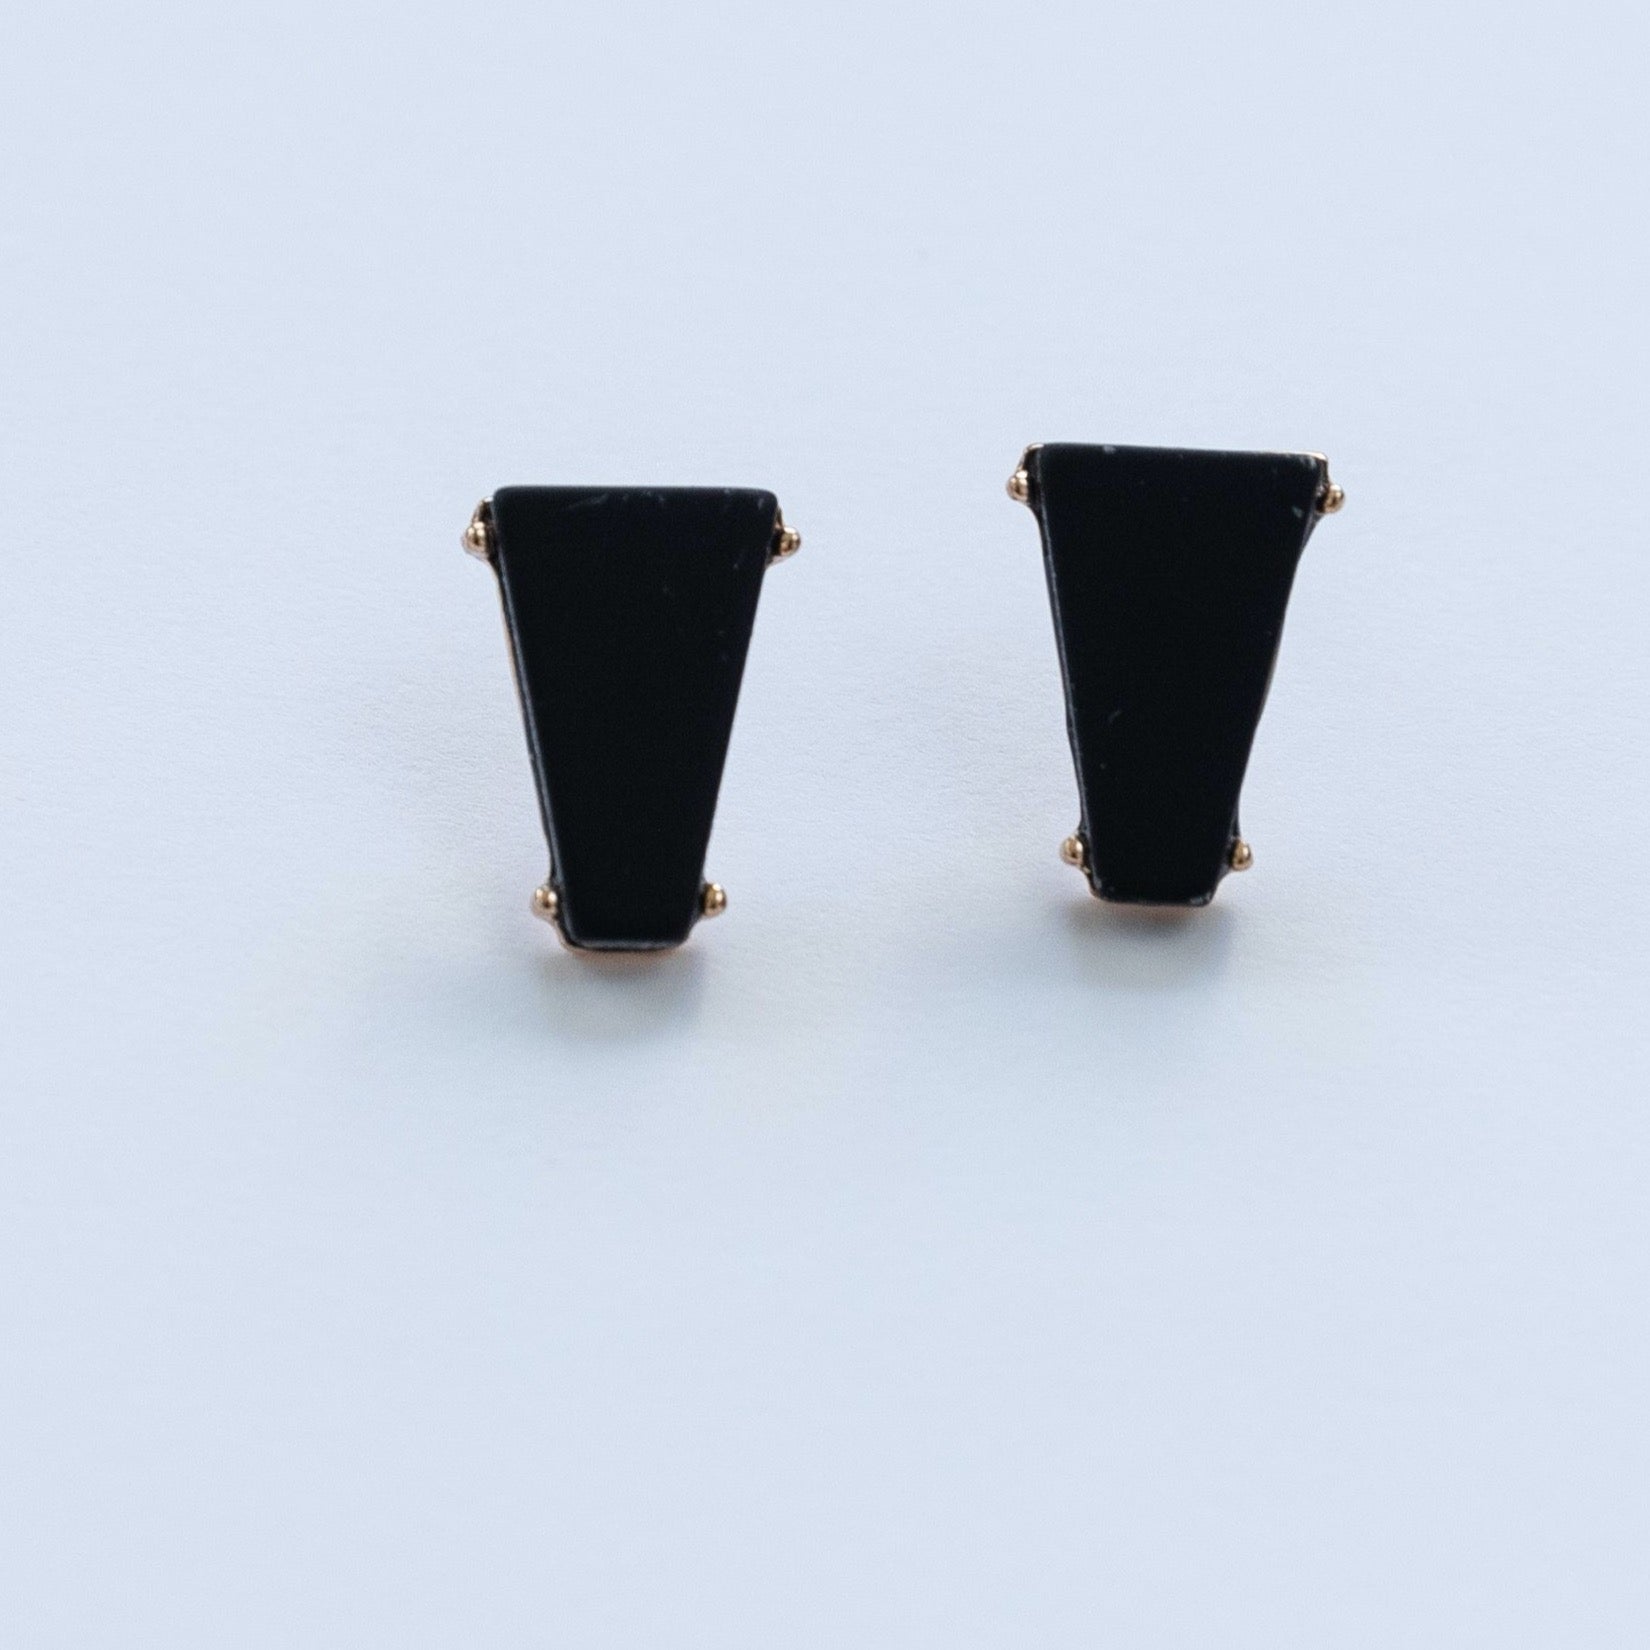 The Earring Cones